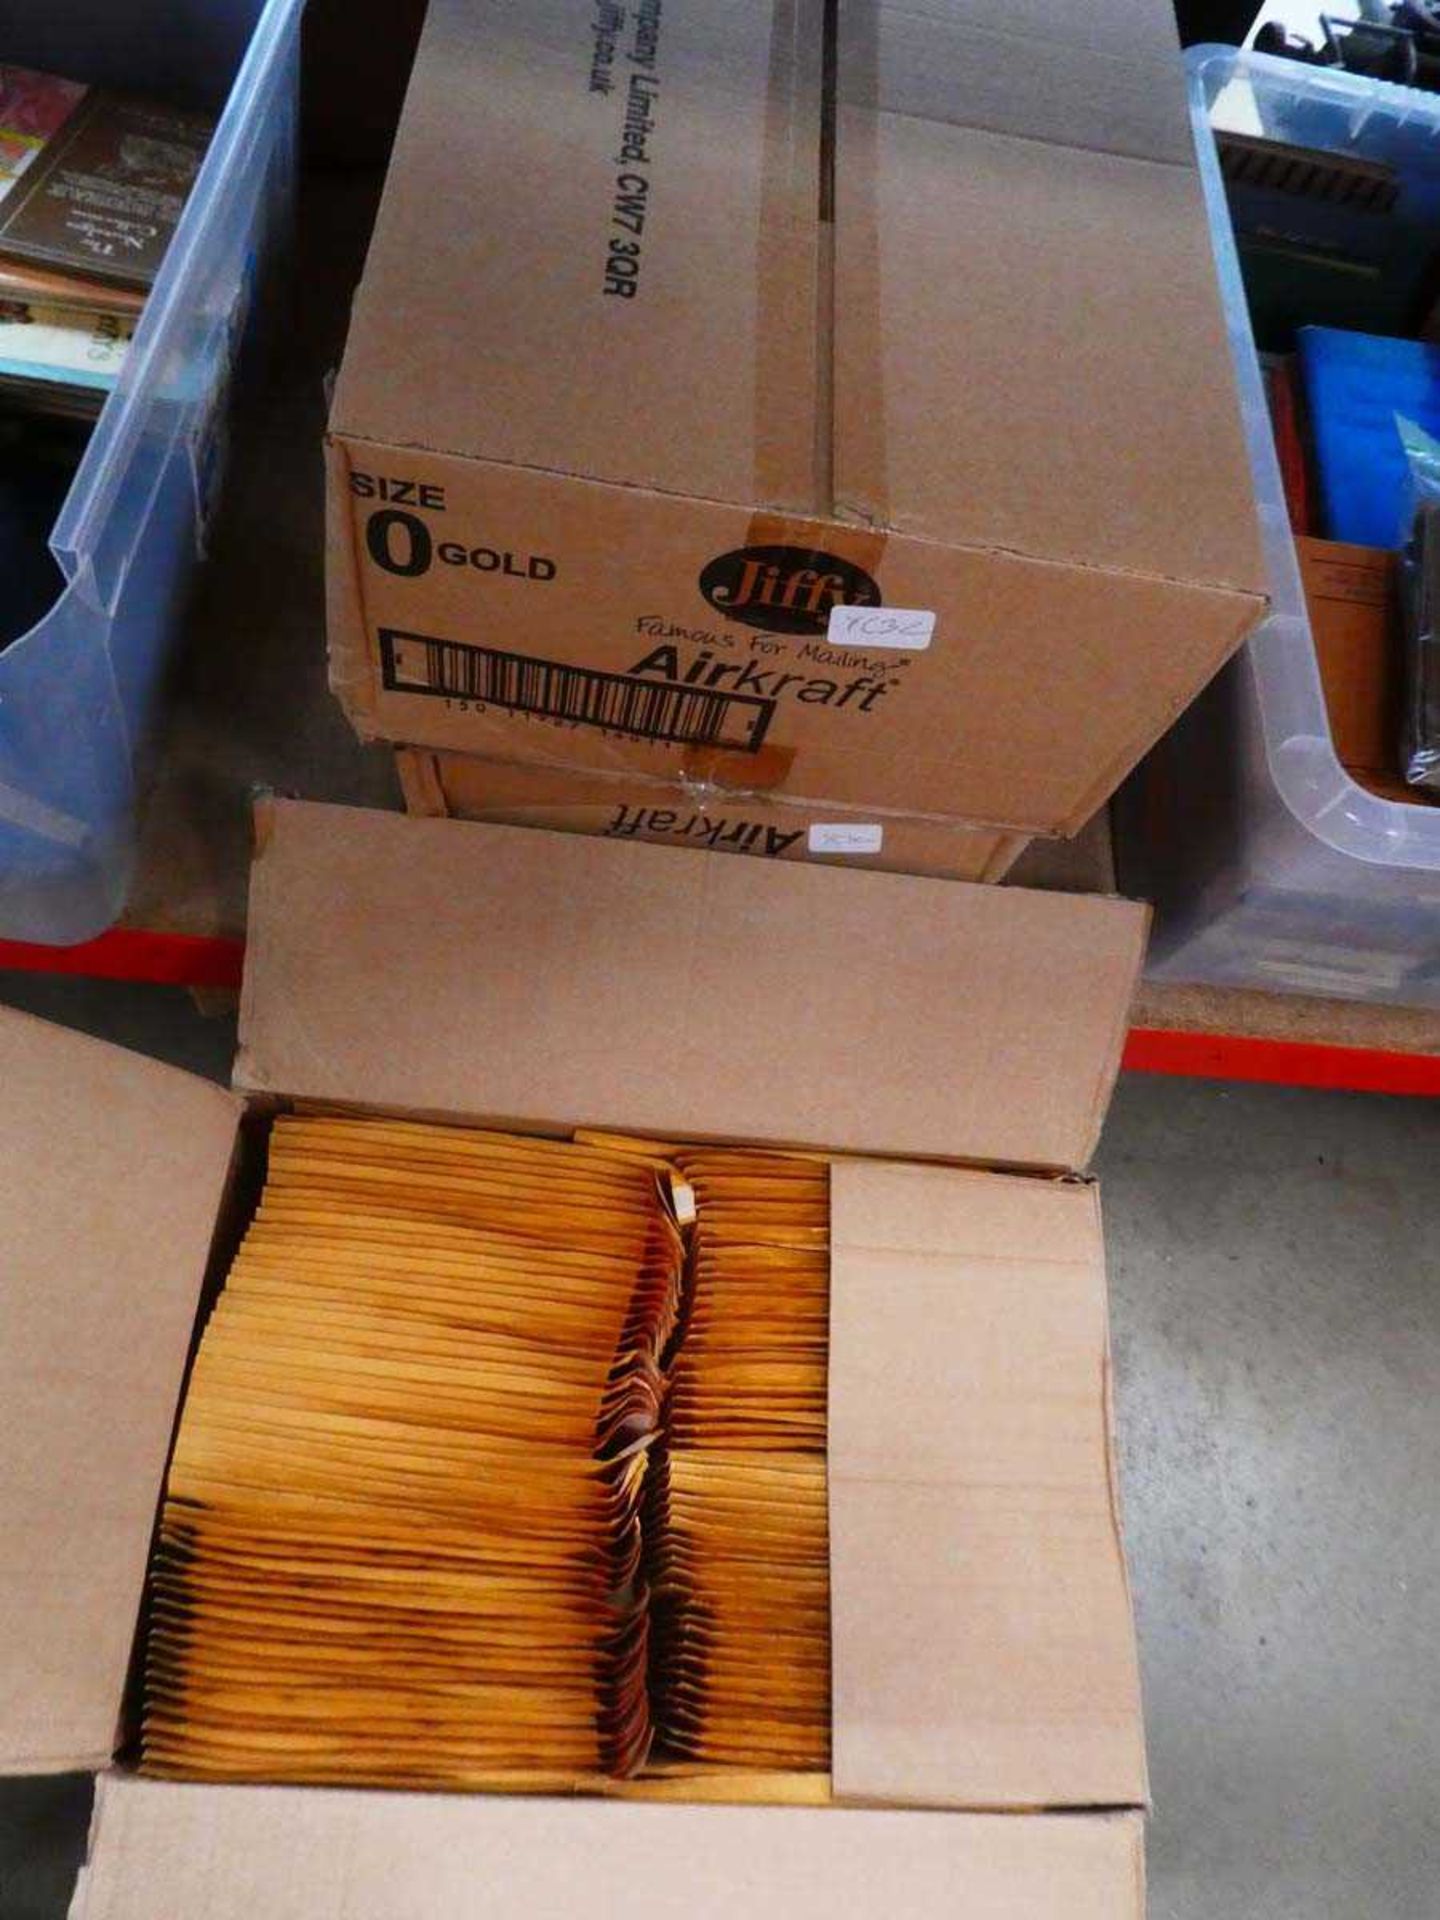 Three boxes containing jiffy packaging envelopes